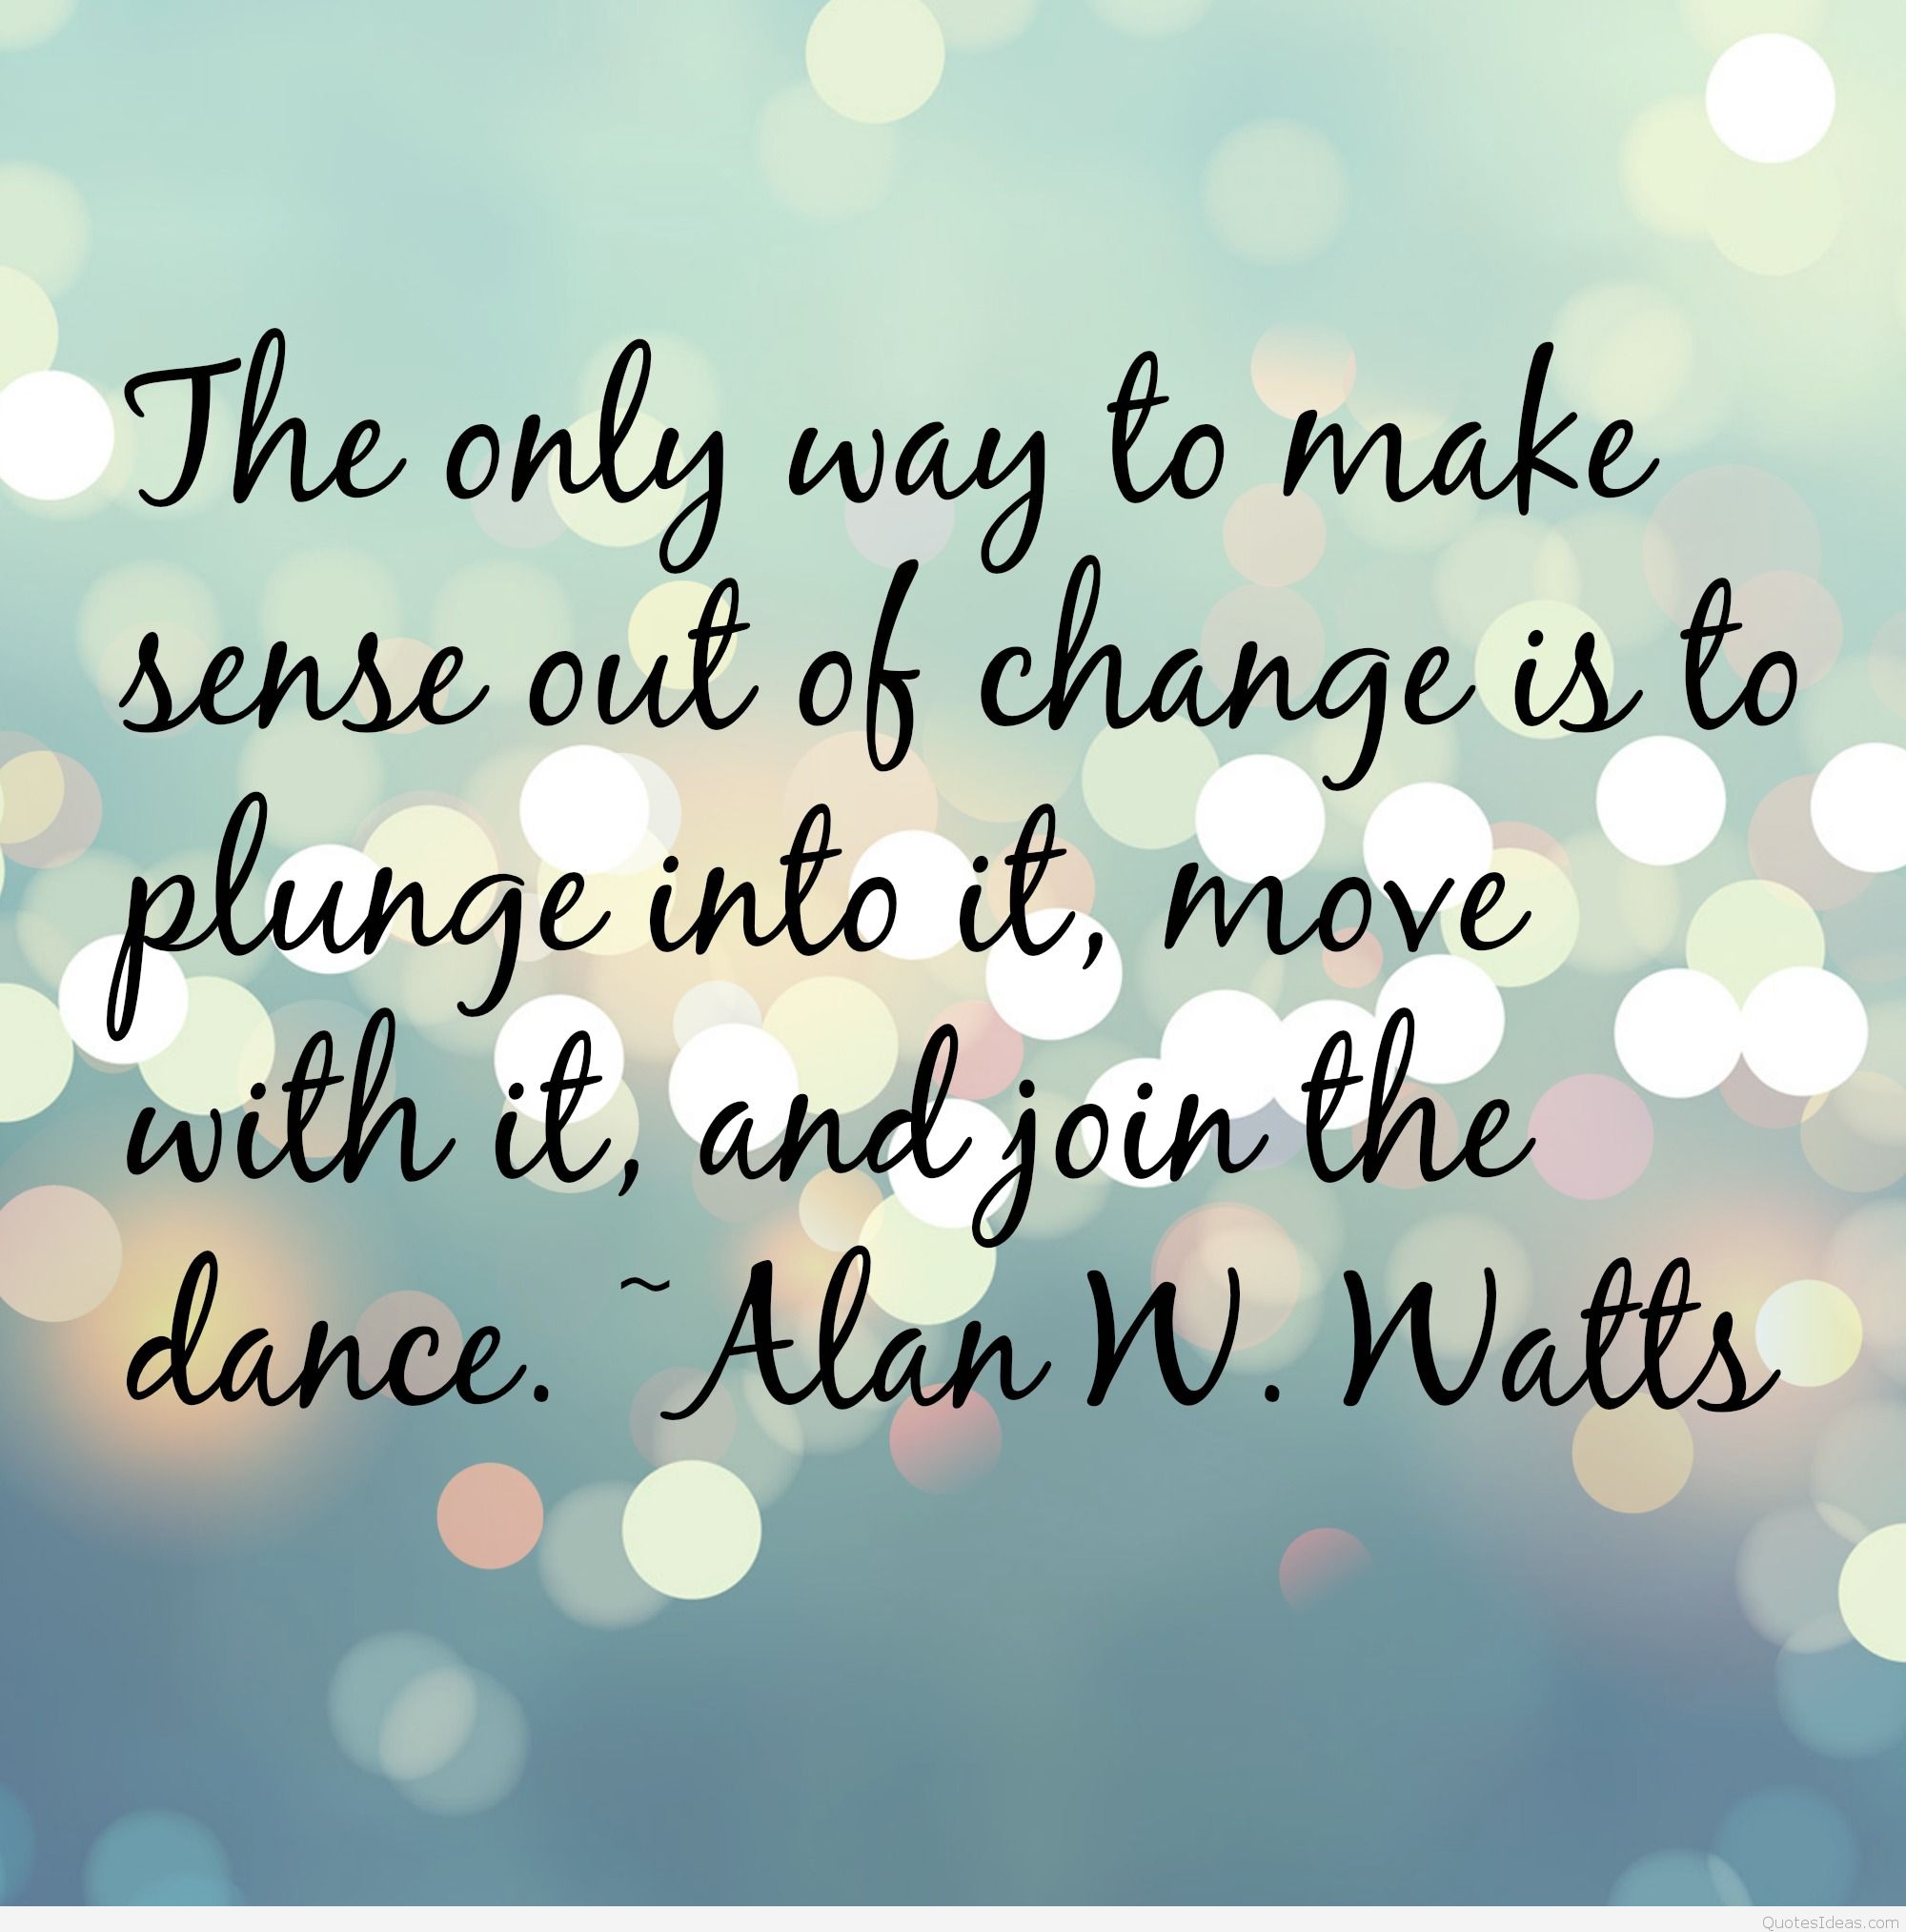 The only way to make sense out of change is to plunge into it, move with it, and join the dance. Alan Watts